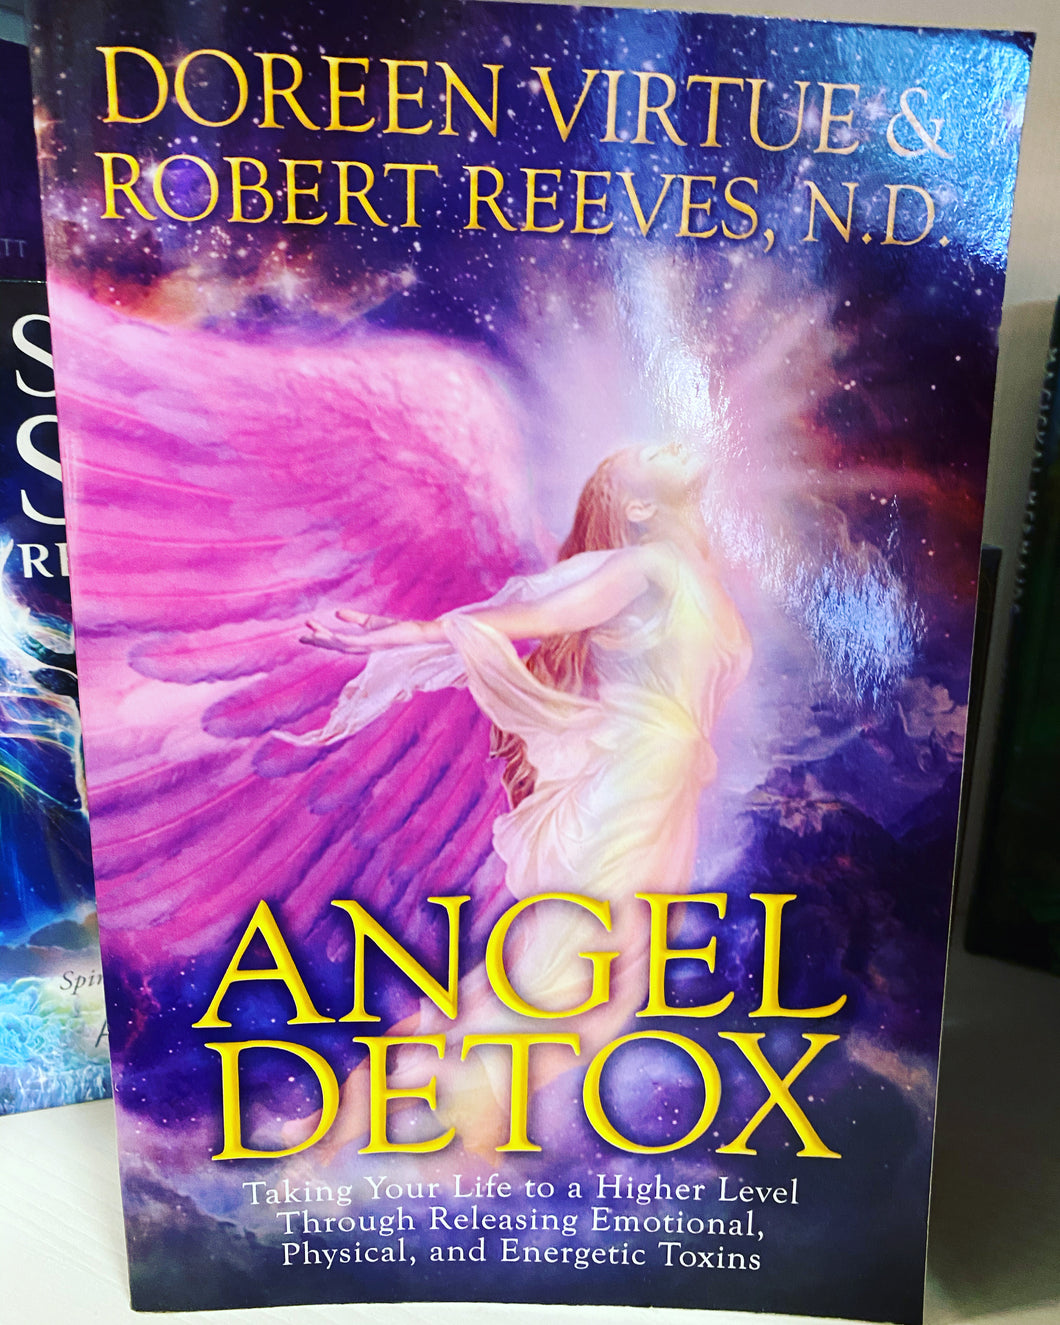 Angel Detox - Taking your life to a higher level